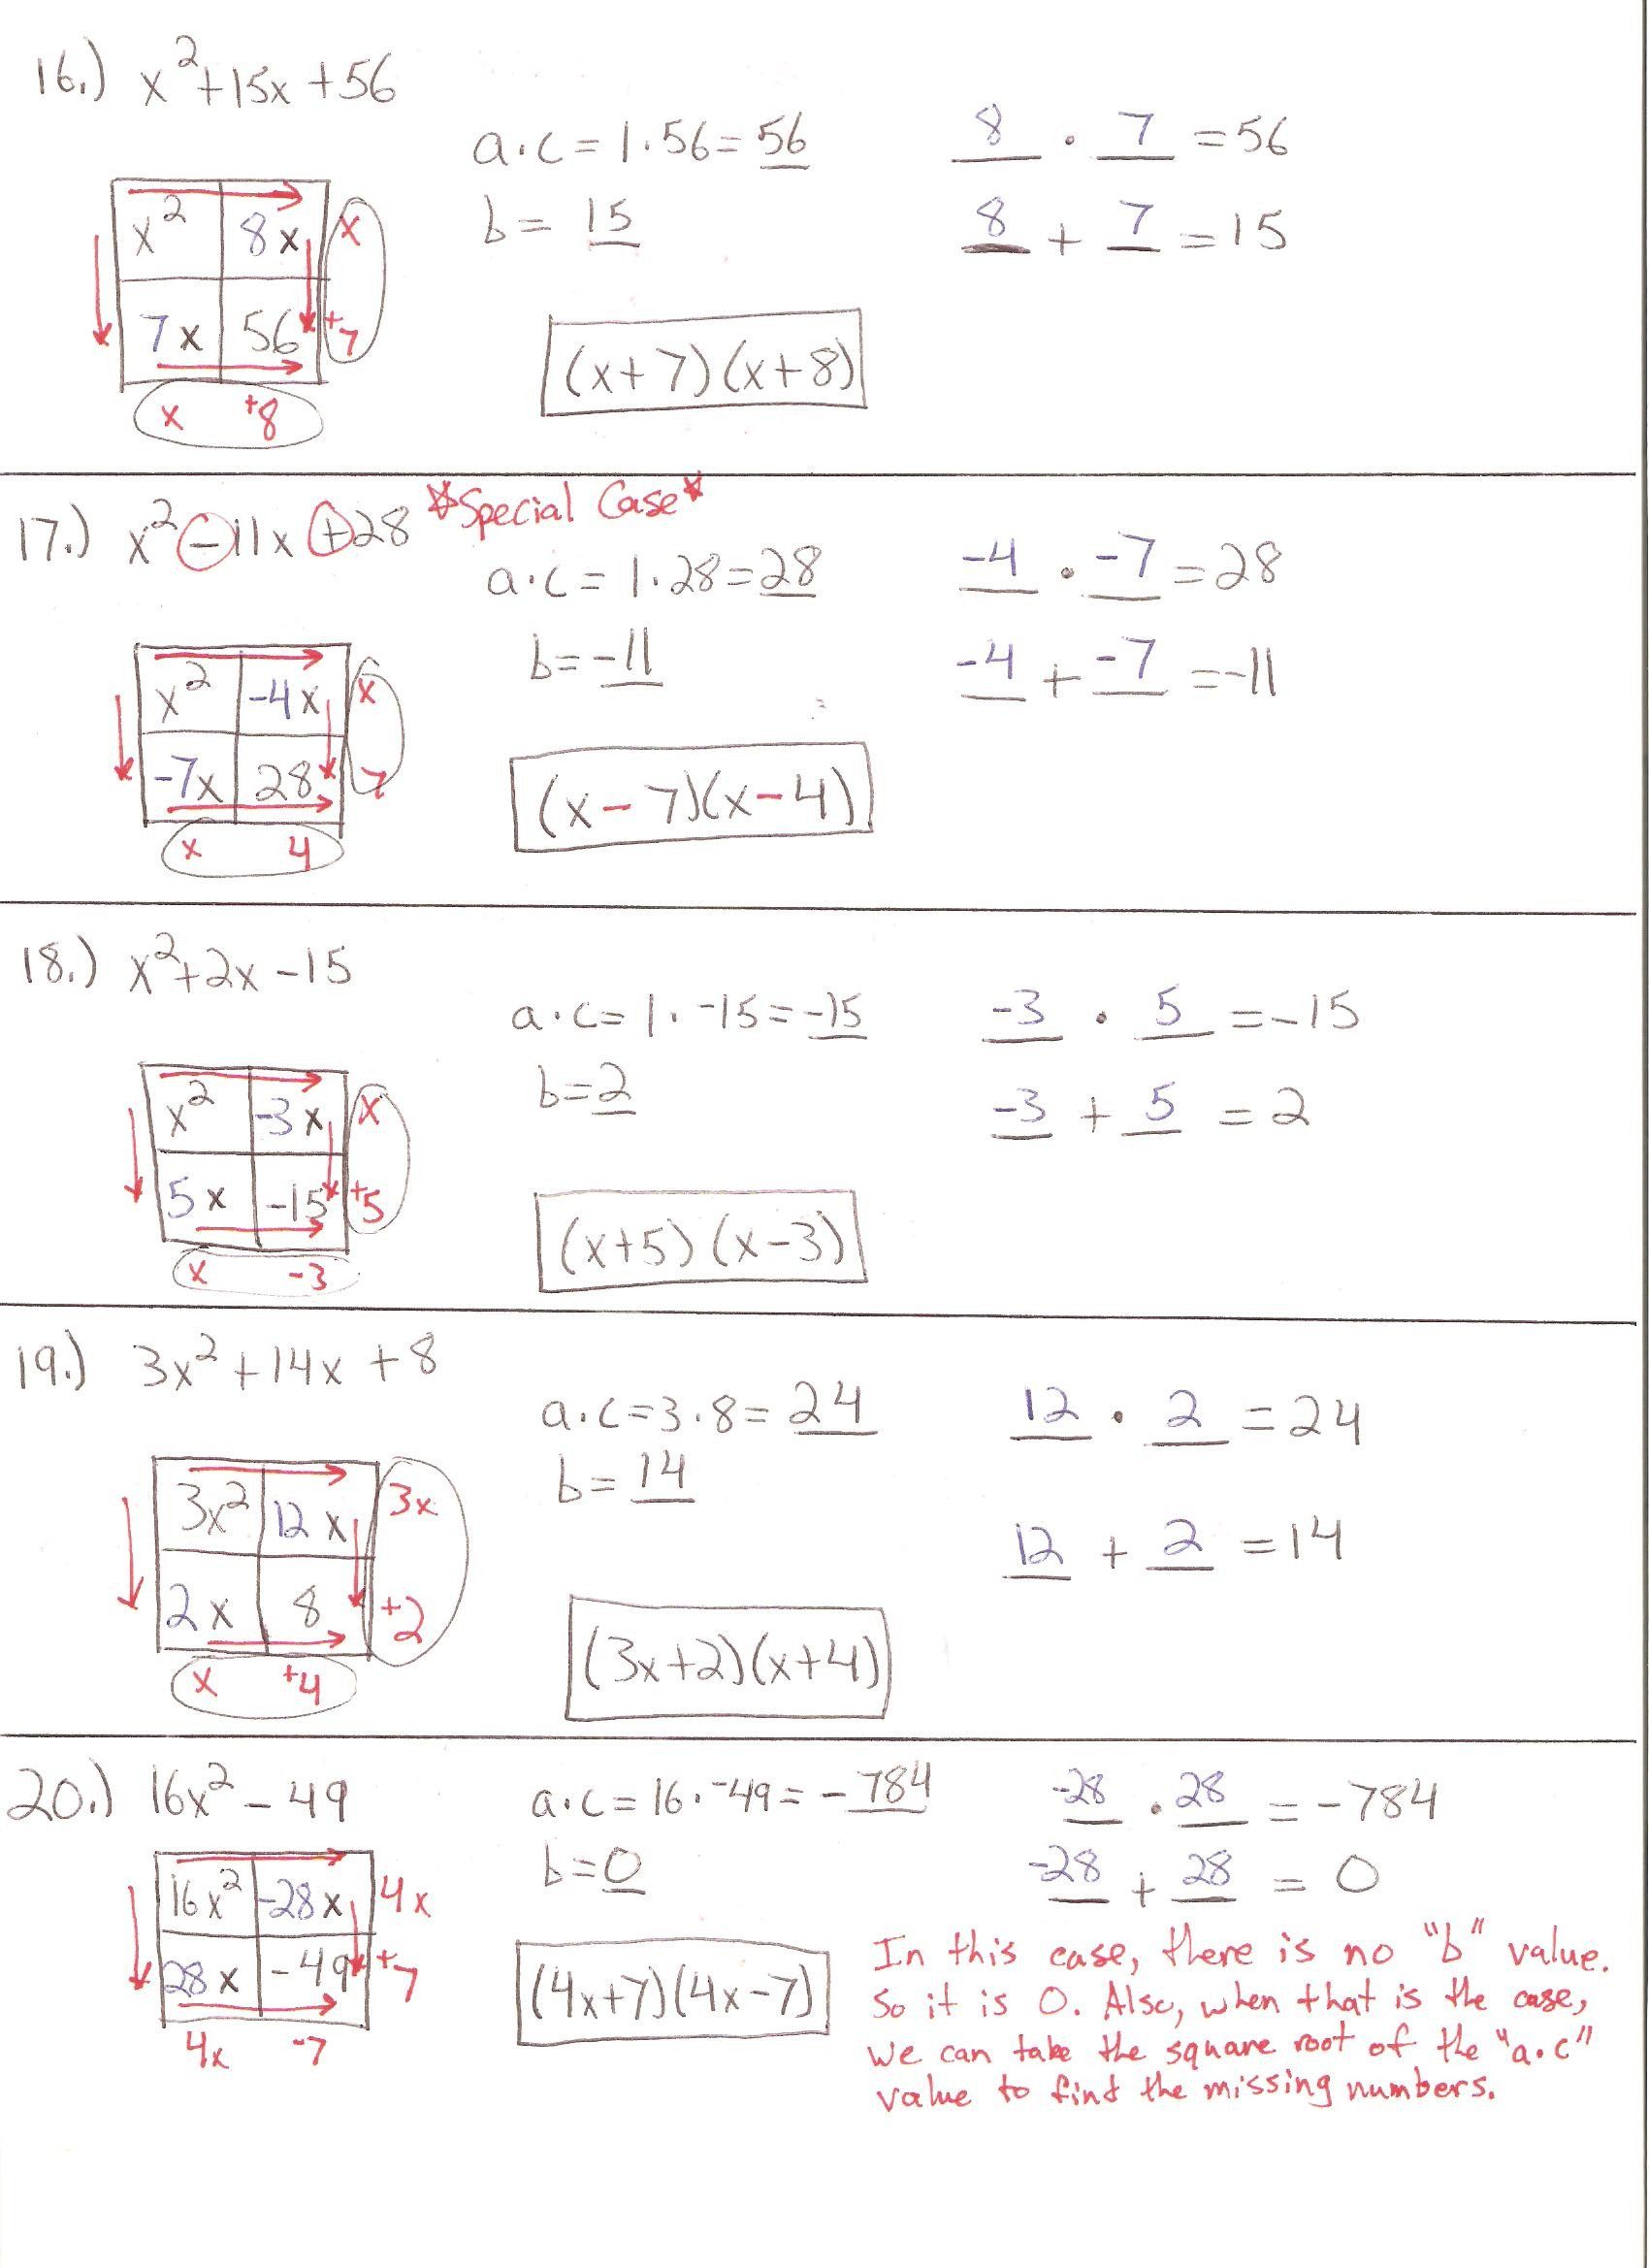 Bunch Ideas Of Factoring Polynomials Worksheet With Answers Awesome Together With Factoring Polynomials Worksheet With Answers Algebra 2